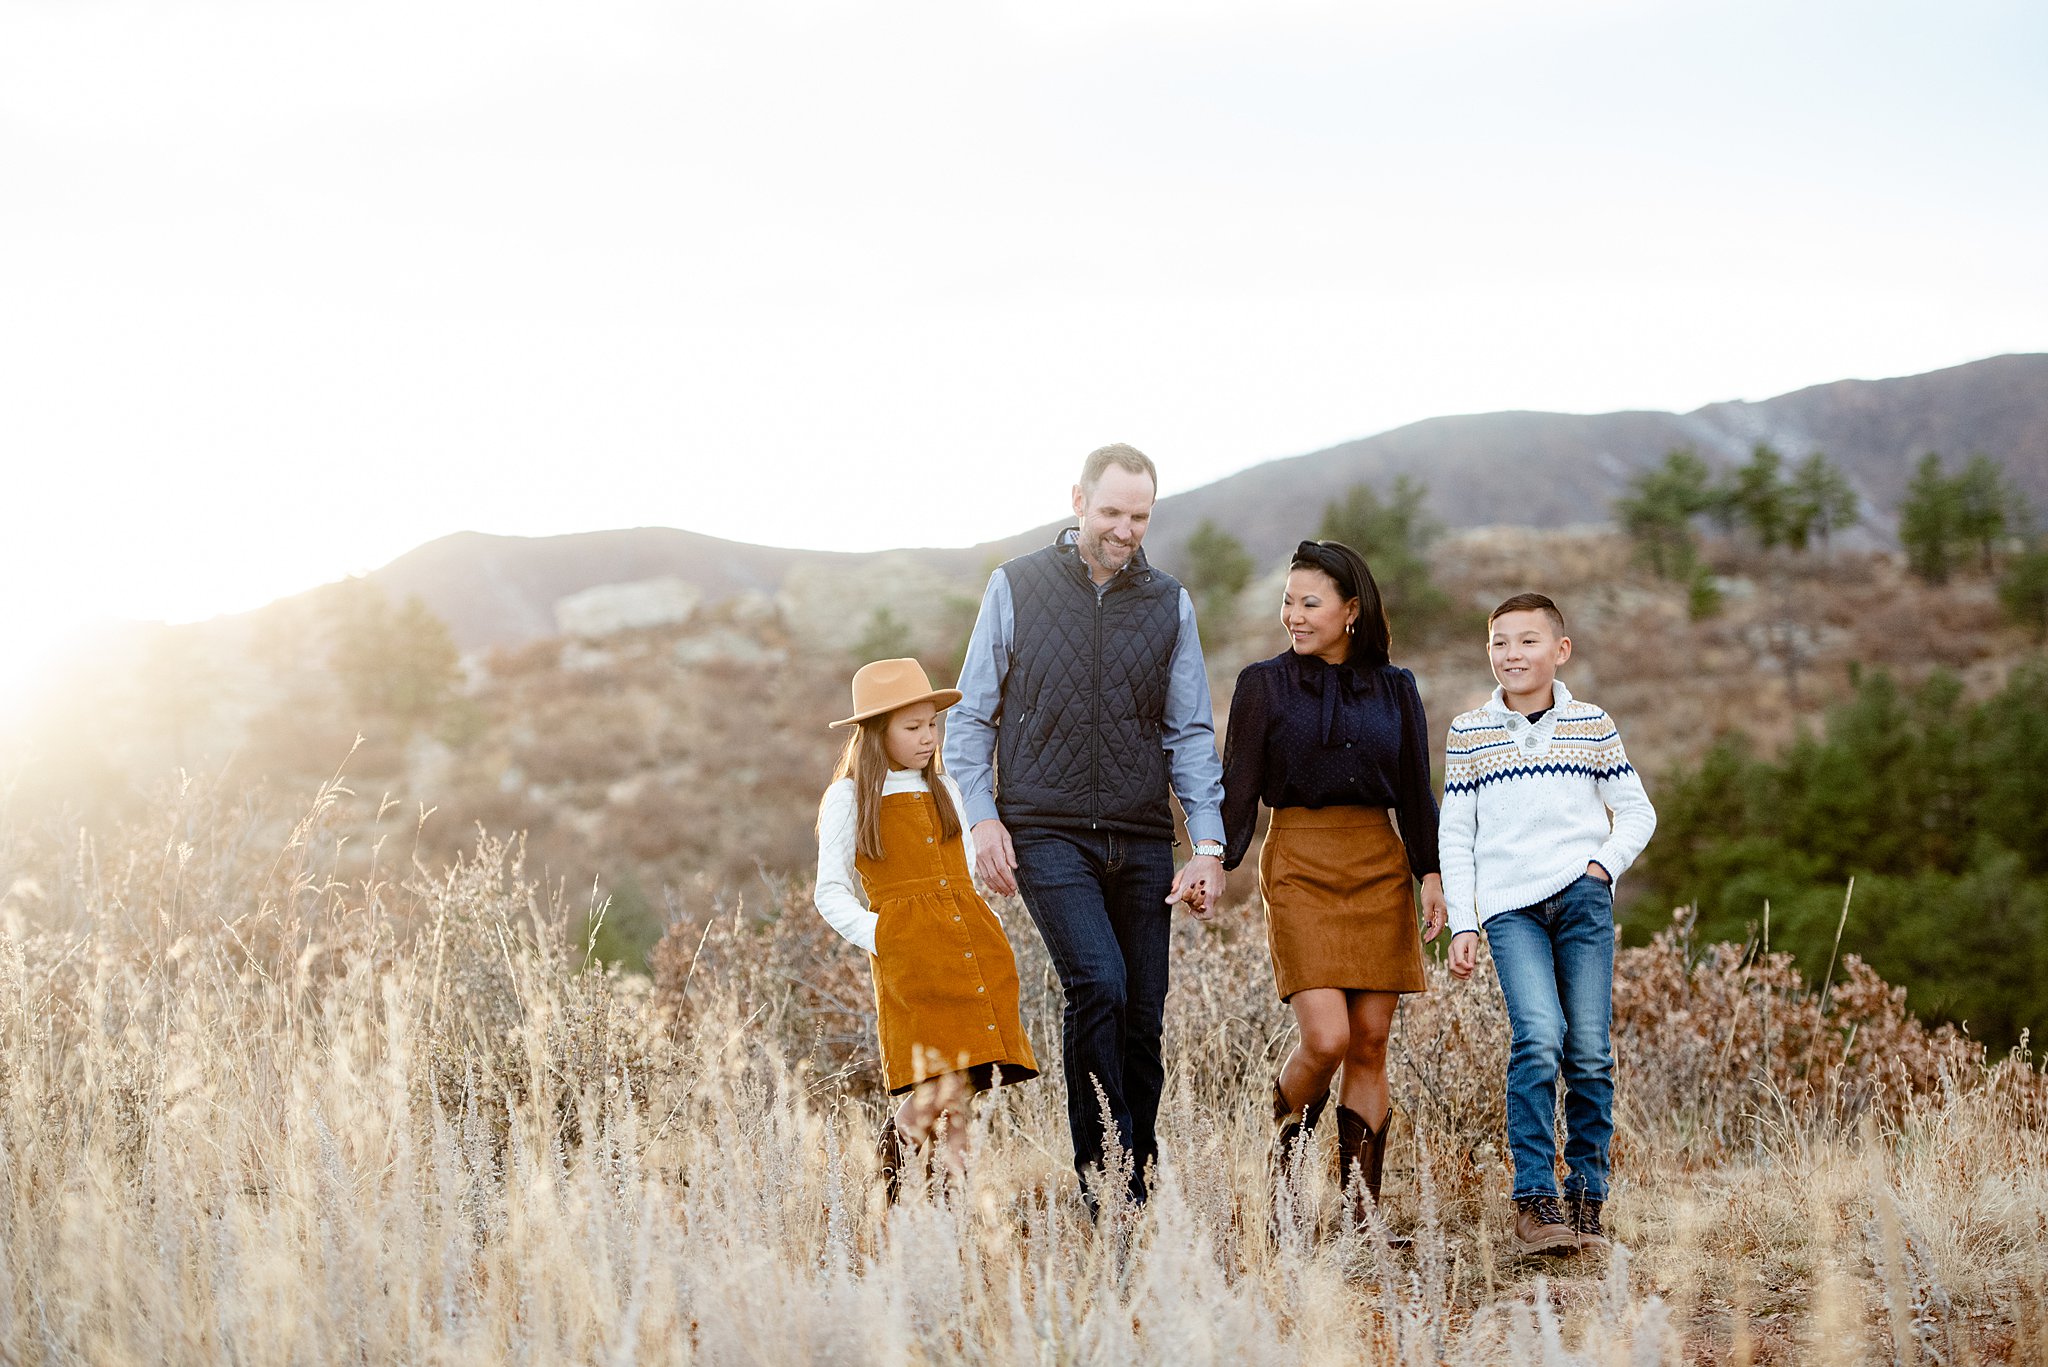 A mom and dad walk through a mountain trail with their young son and daughter after visiting a colorado springs pediatric dentistry